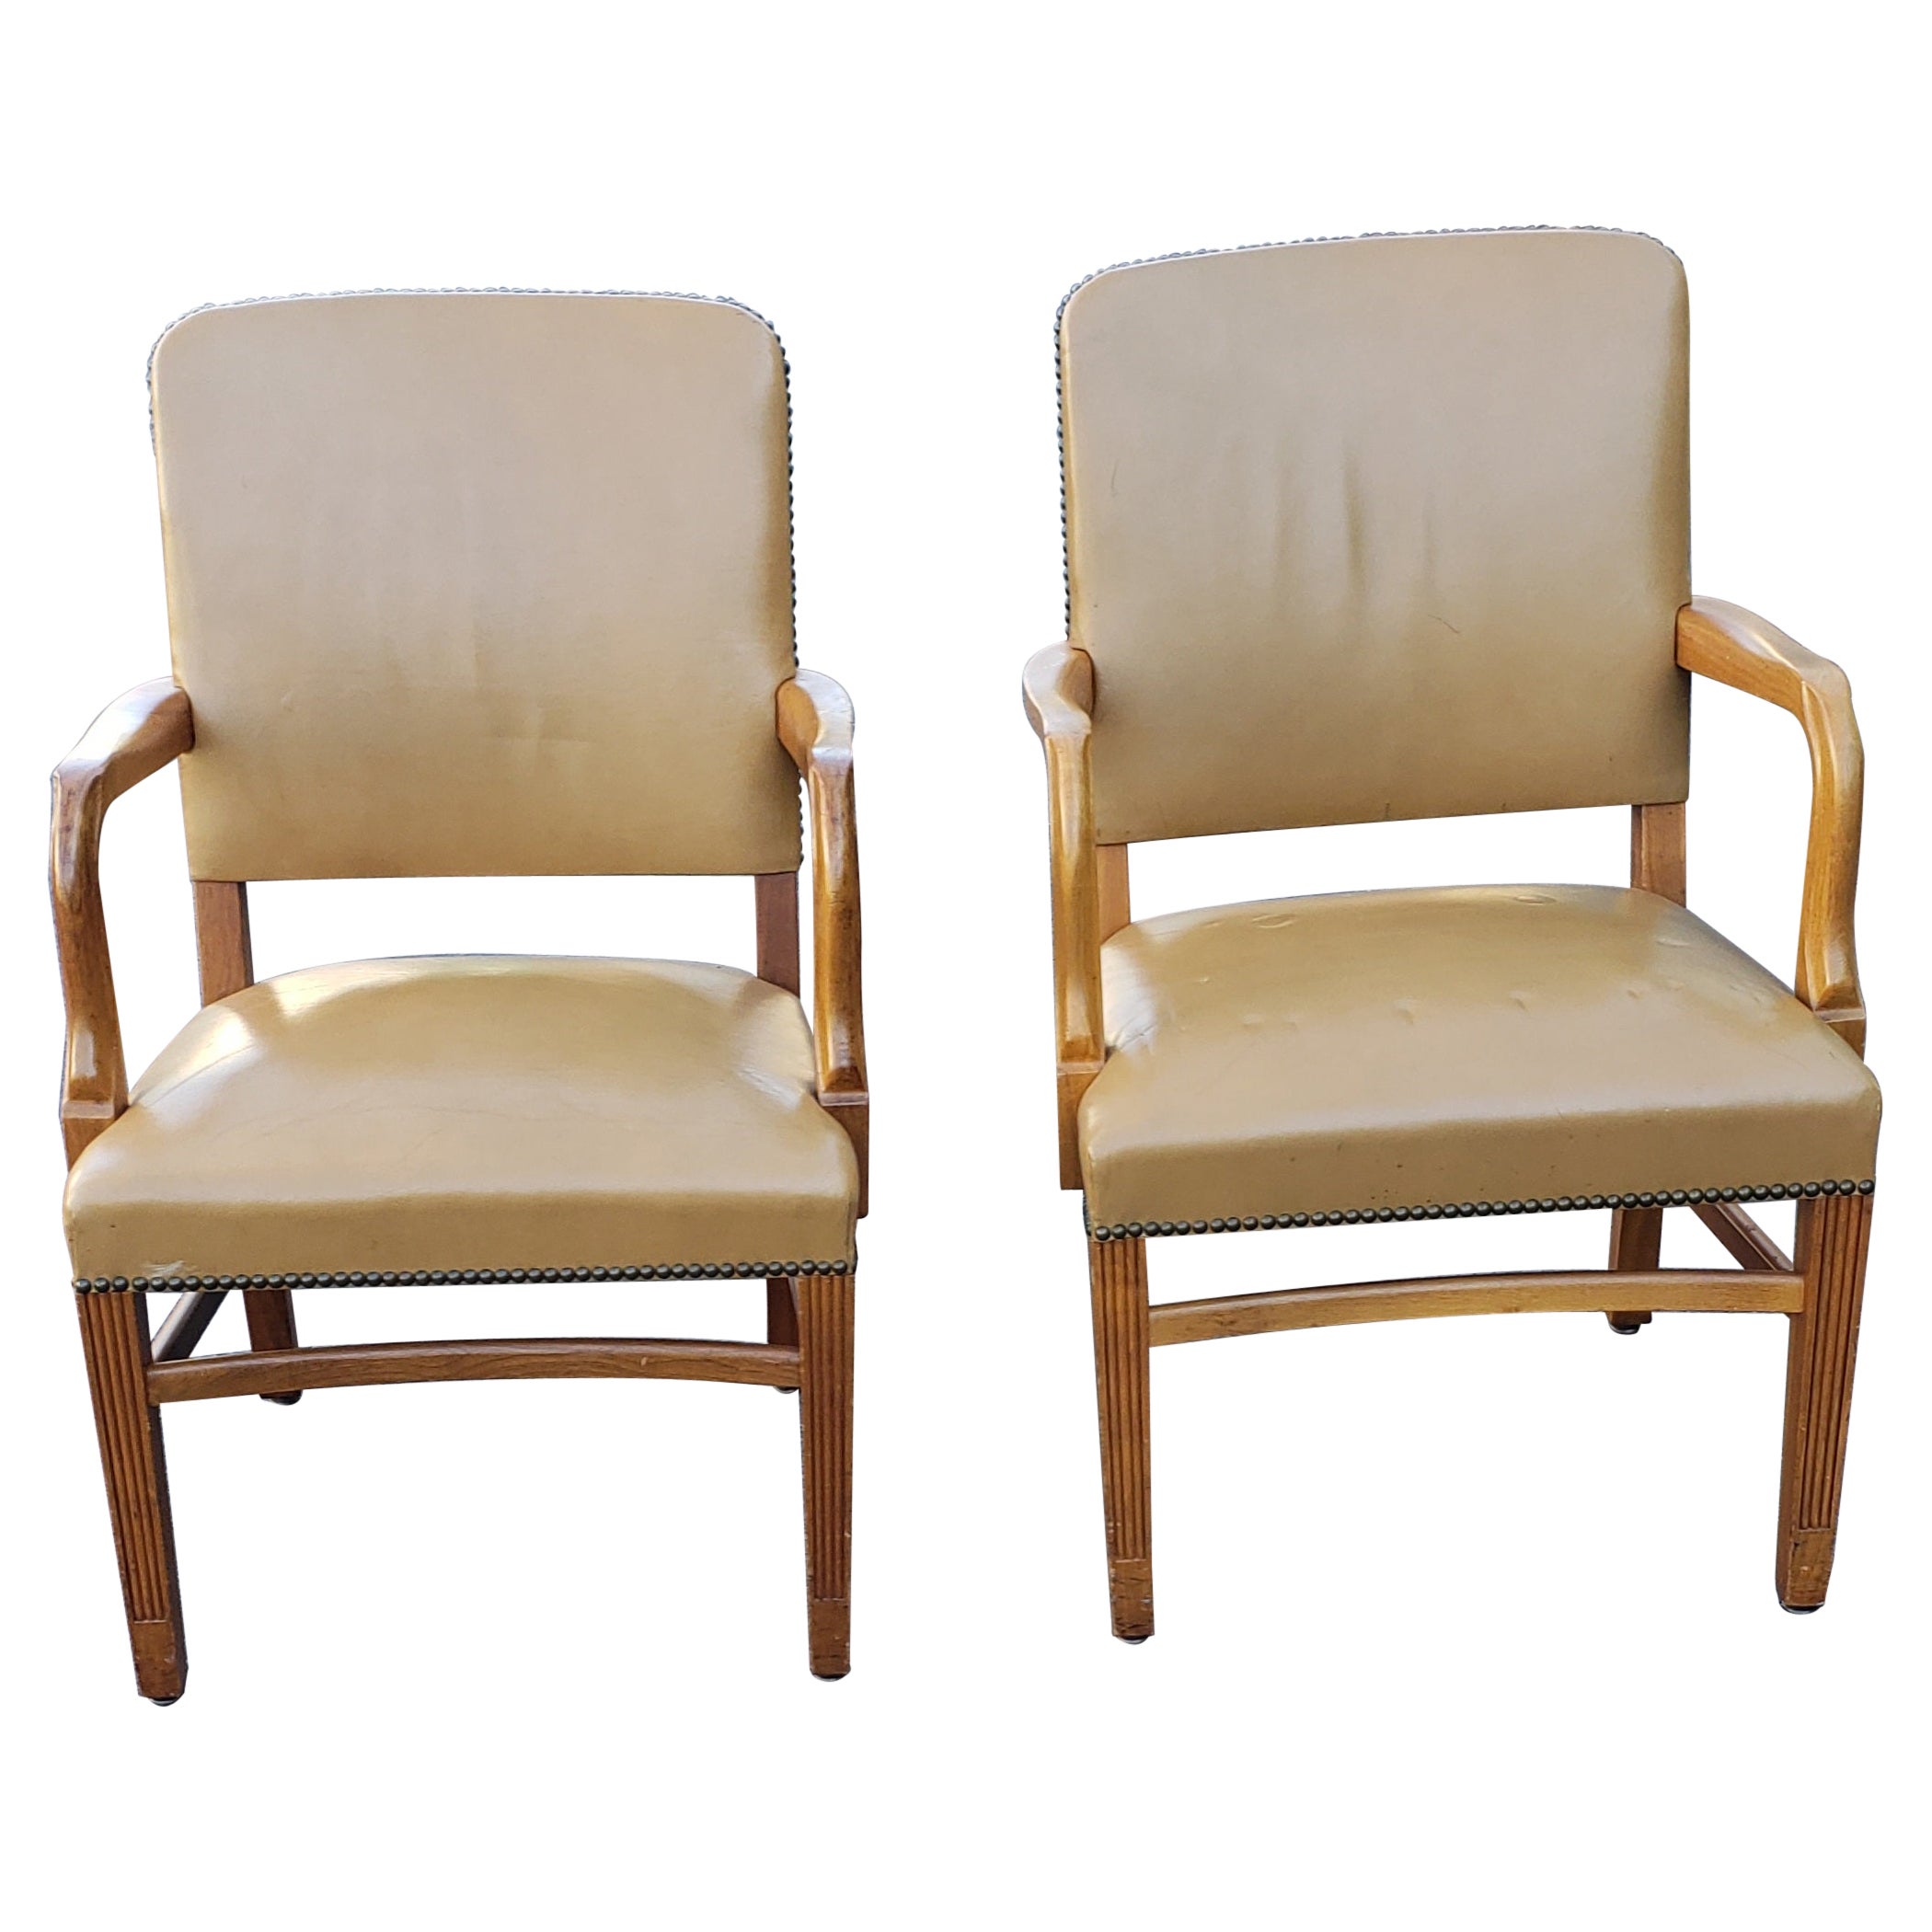 Pair of 1970s Gunlocke Fruitwood and Leather Armchairs